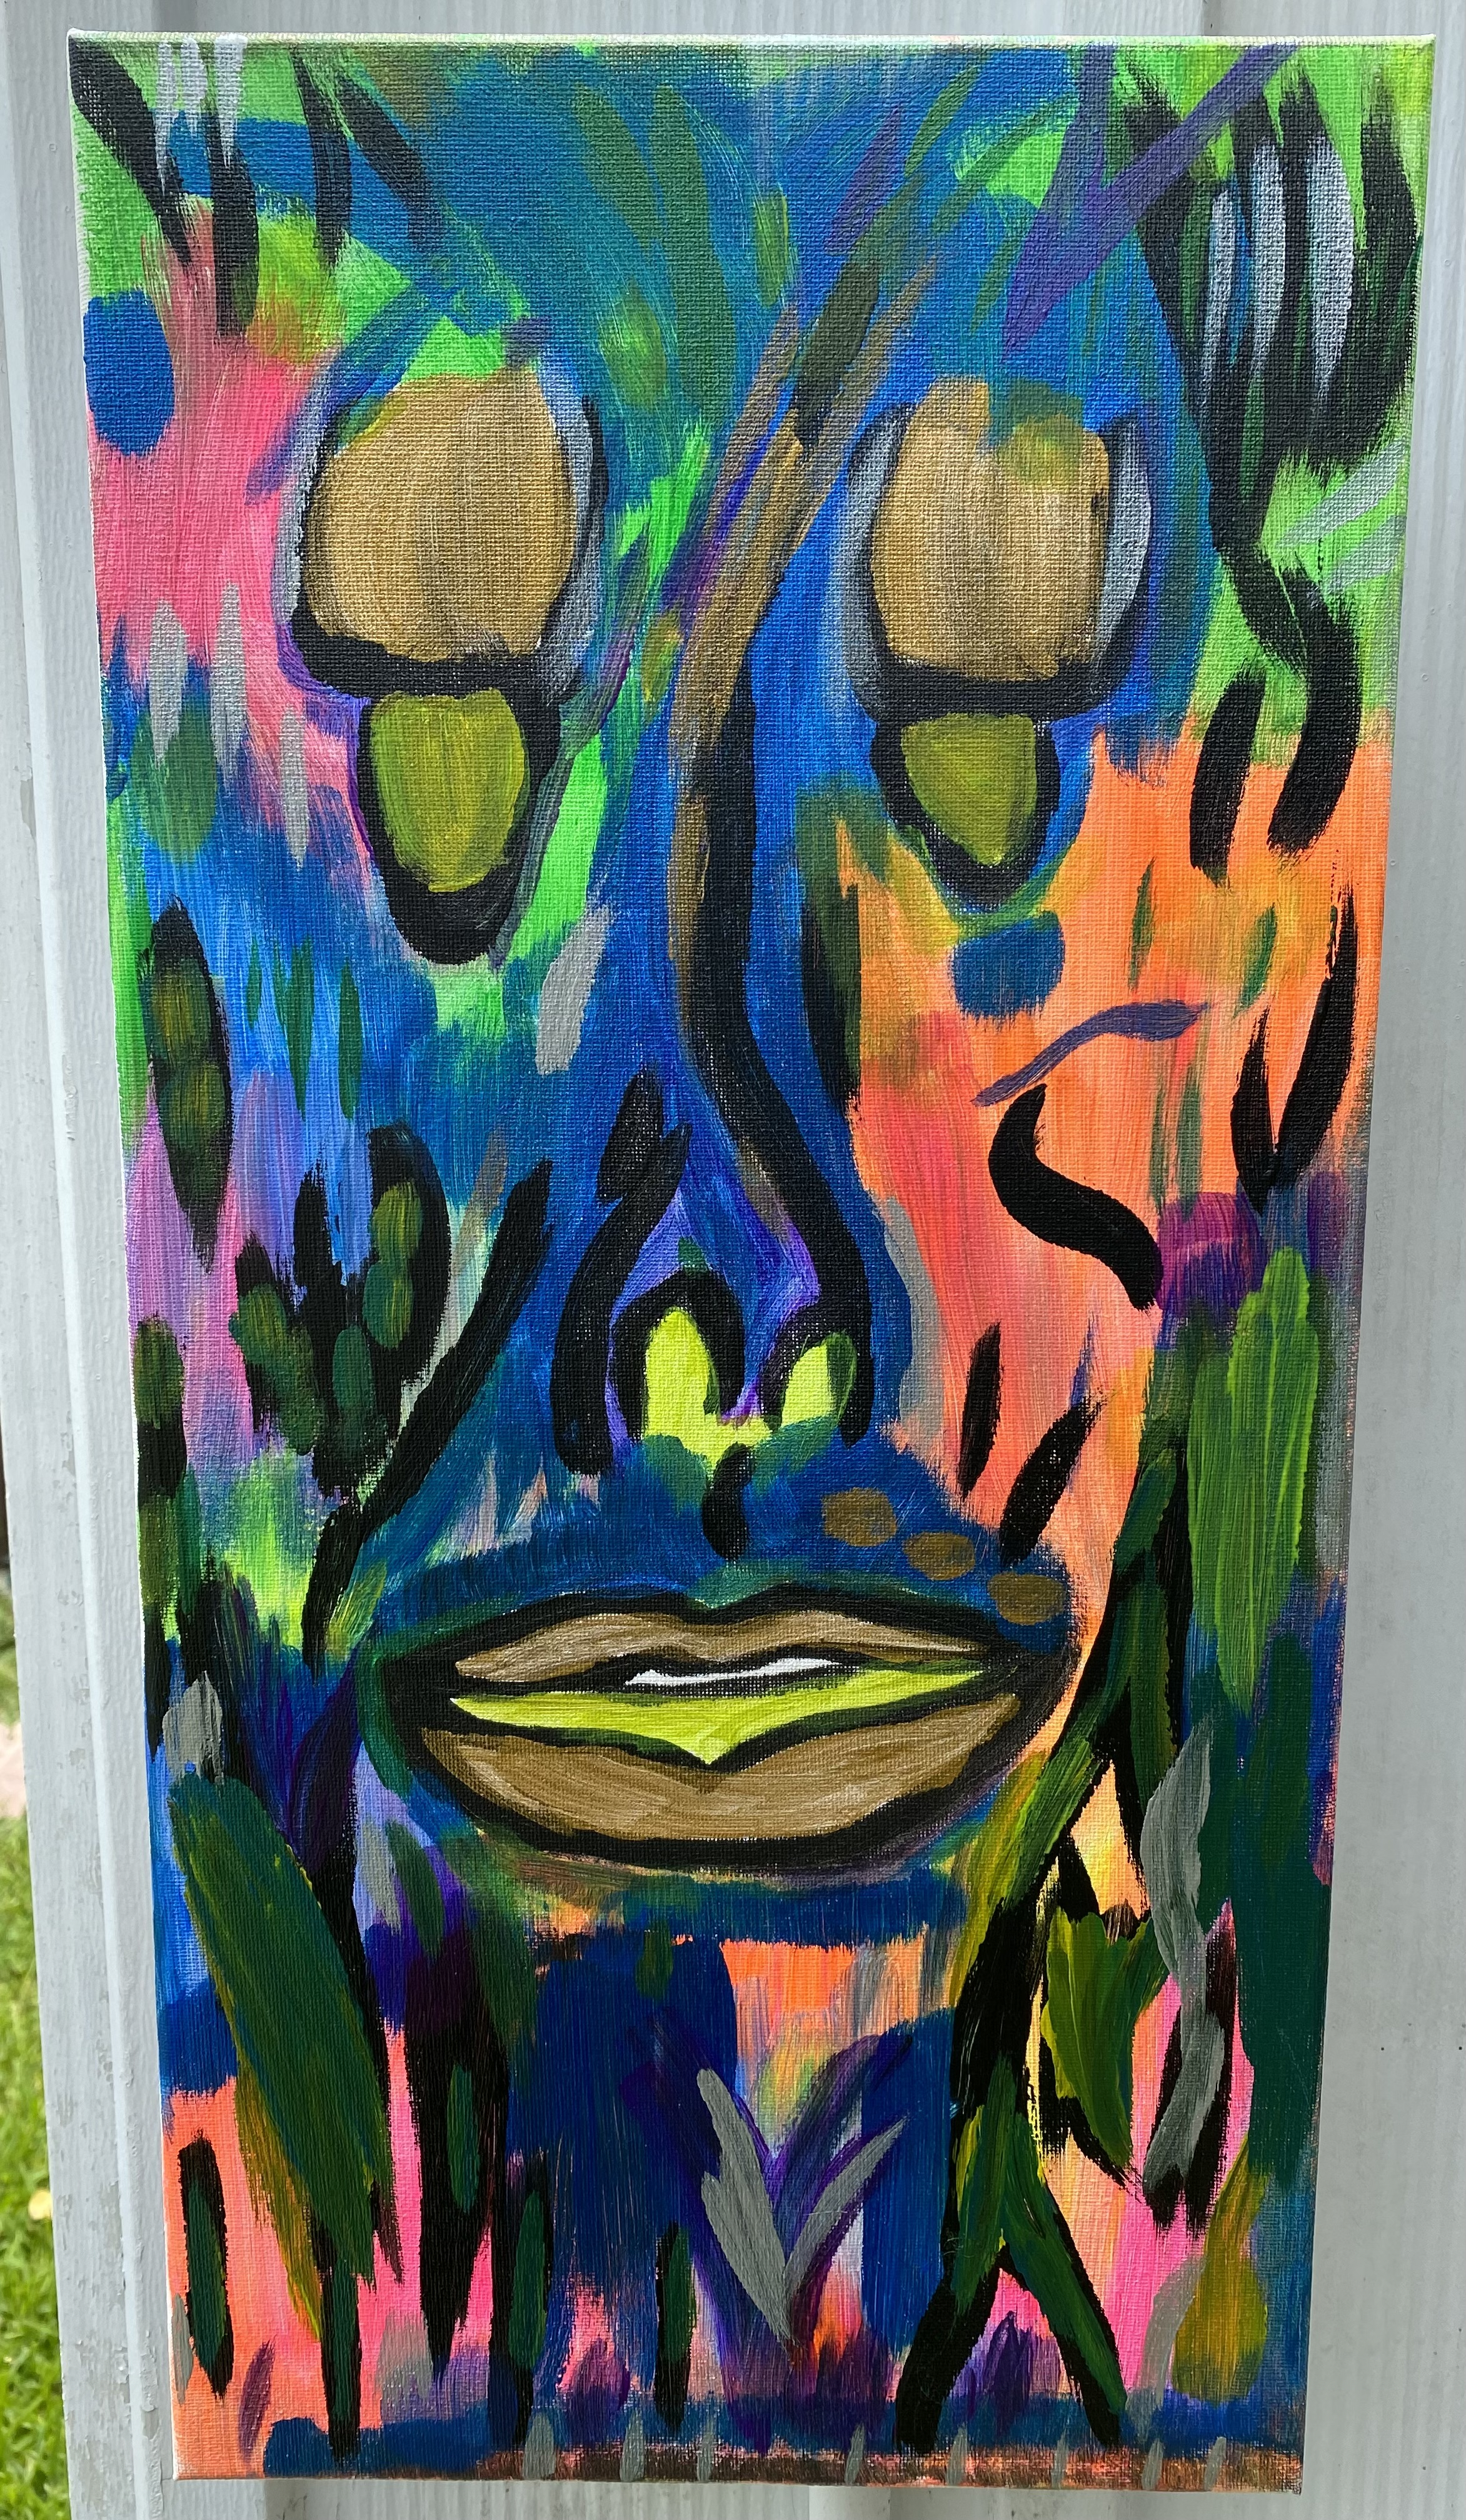 10in x 20in canvas with a woman crying gold and yellow tears. rapid brush strokes of vibrant neon arcylic paints are scattered throughout. no woman was hurt during the creation of this painting. 